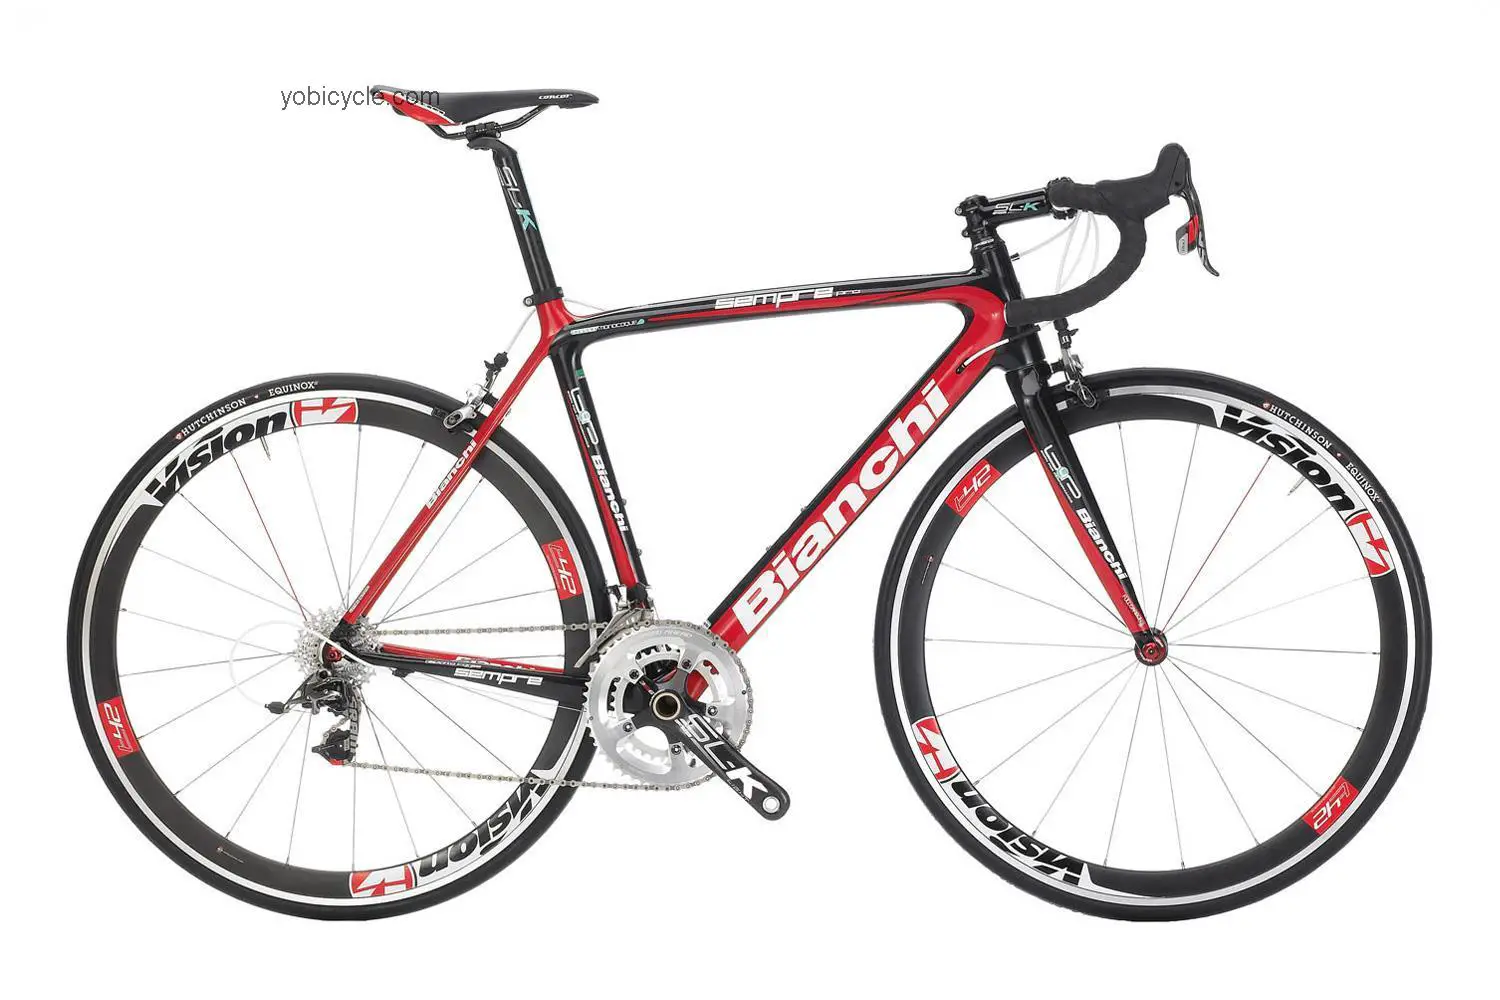 Bianchi Sempre Sram Red competitors and comparison tool online specs and performance